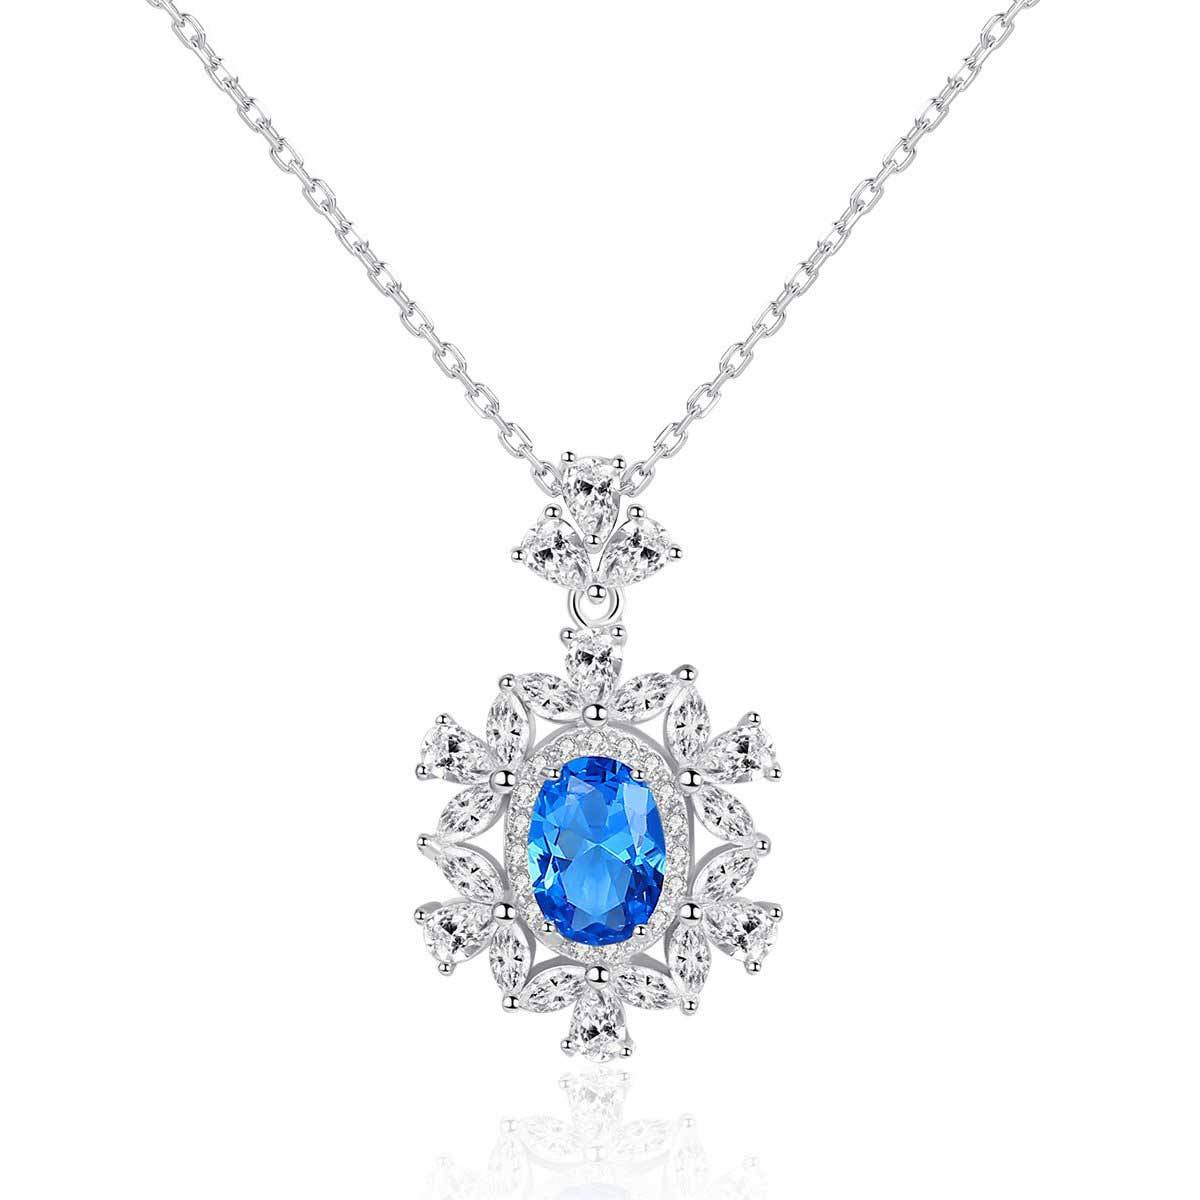 Antique Sapphire Necklace - HERS